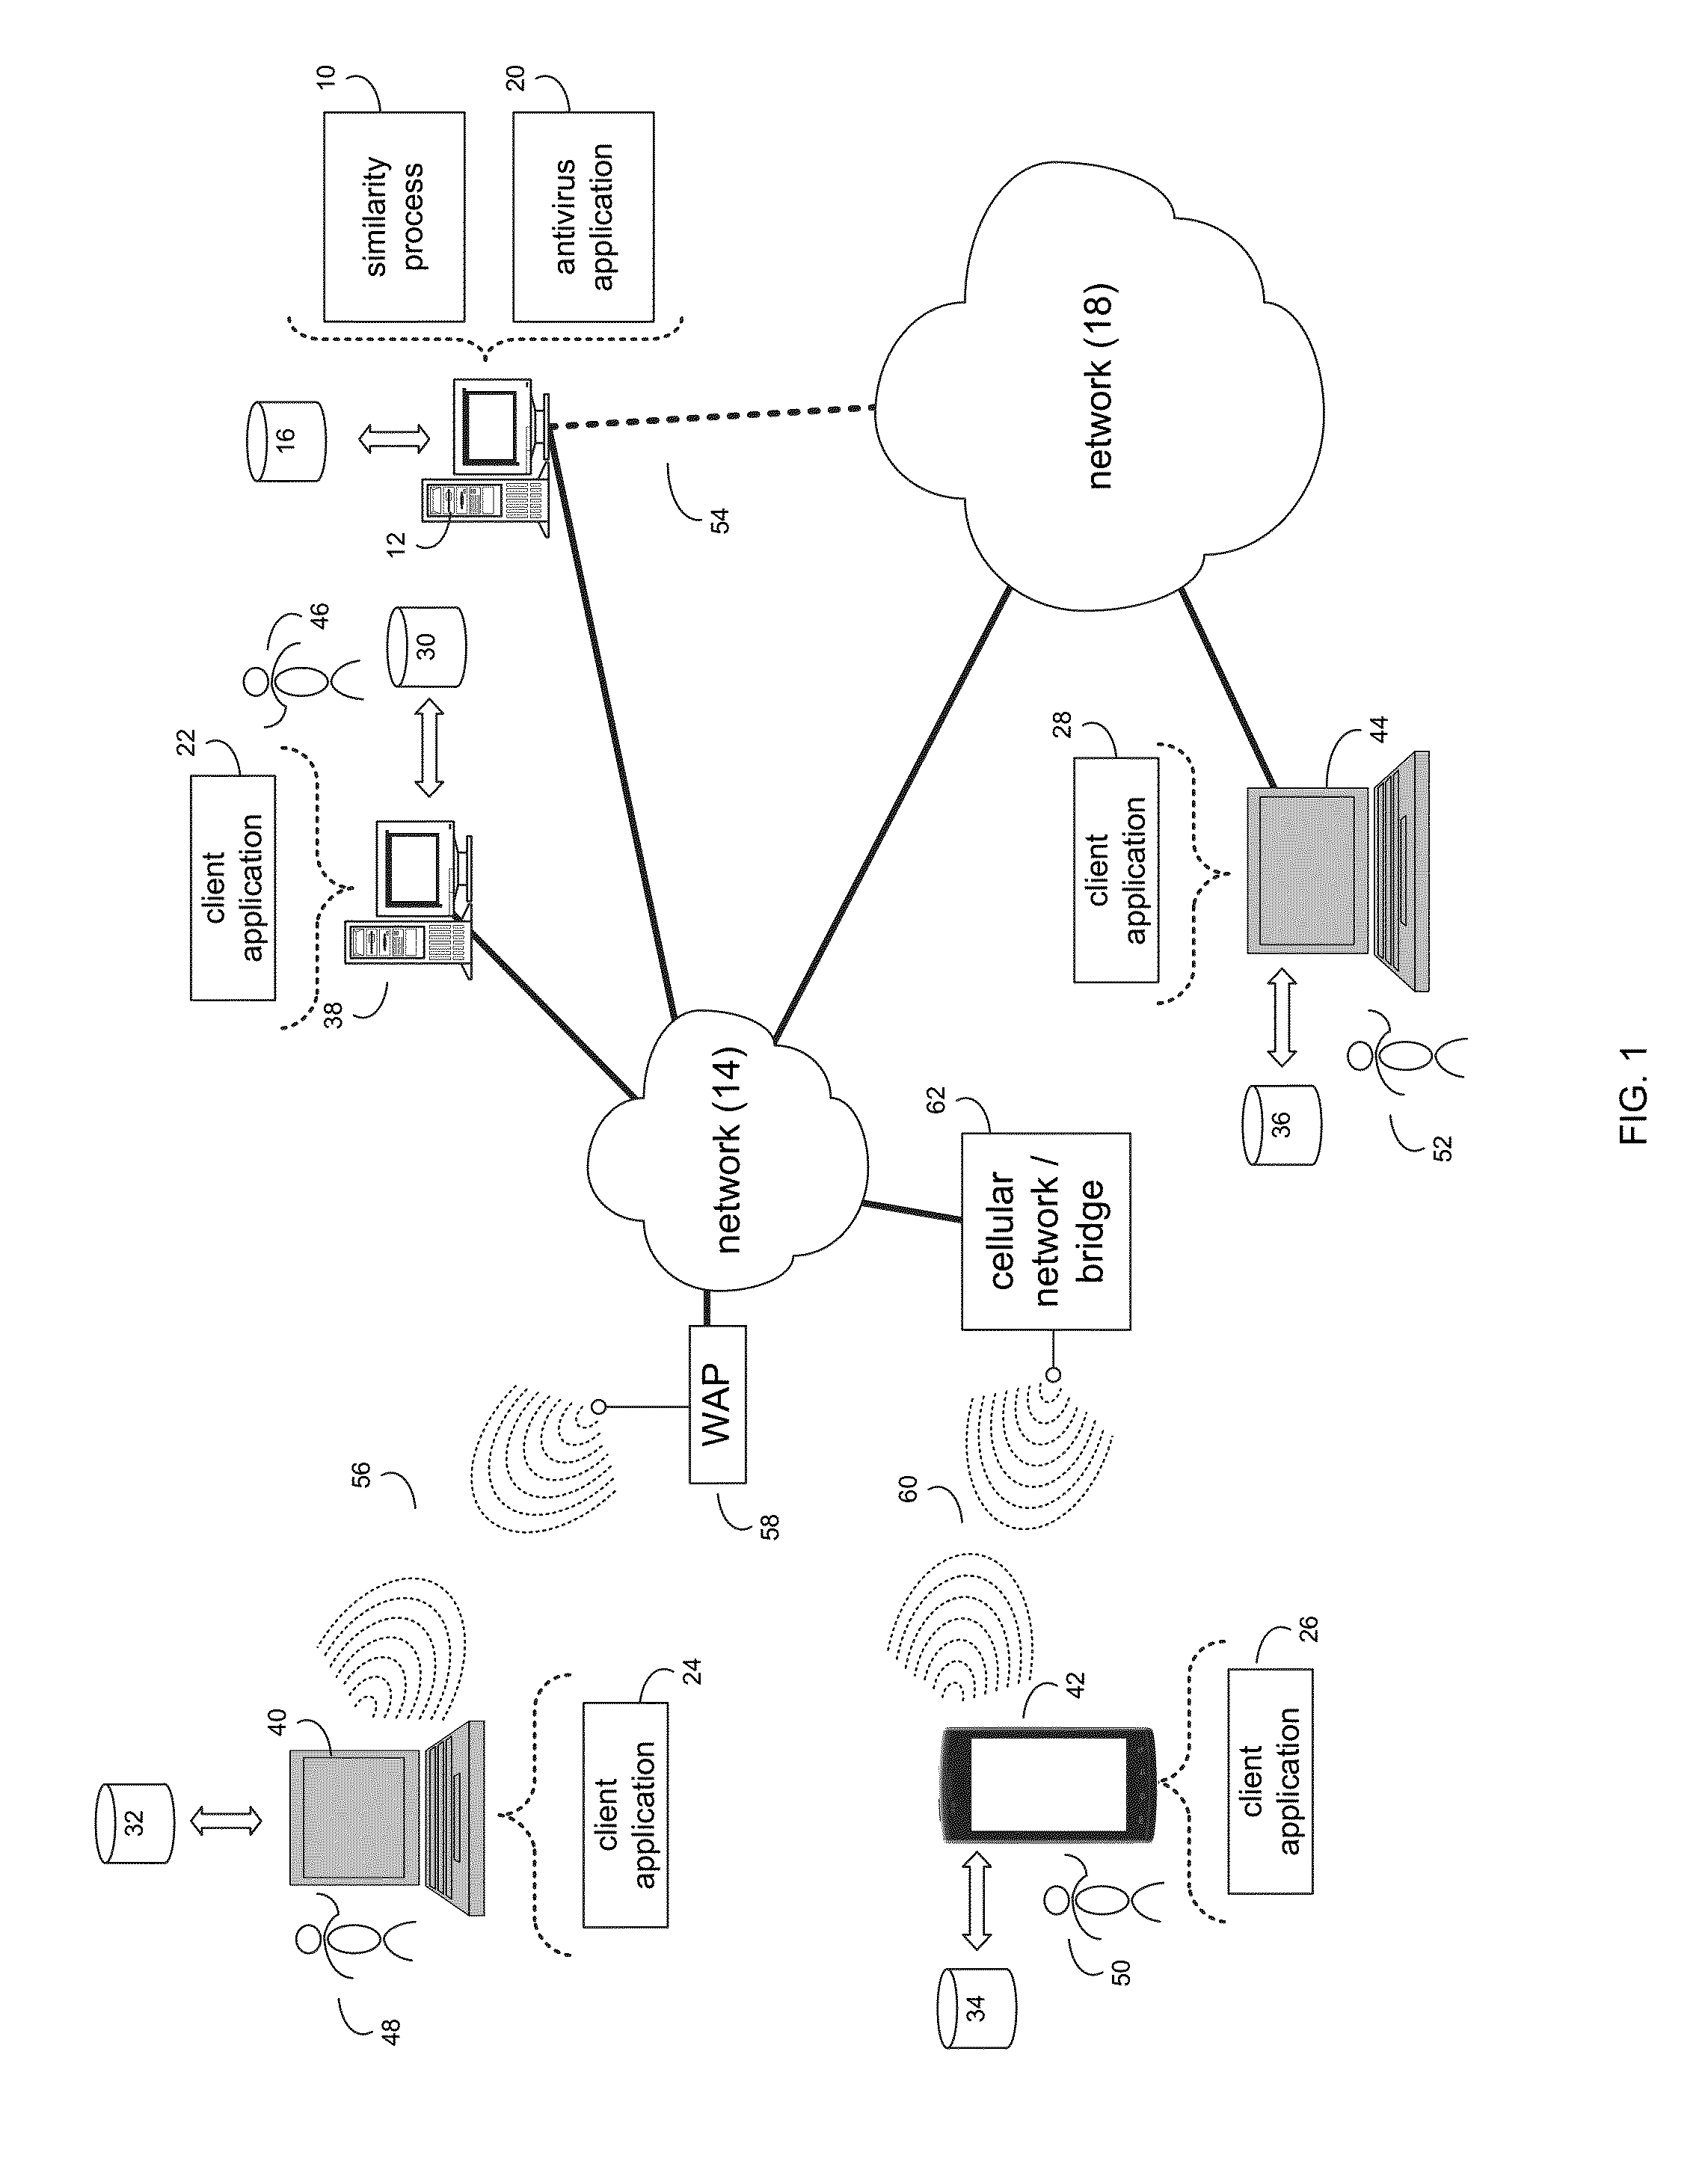 System and method for fast and scalable functional file correlation